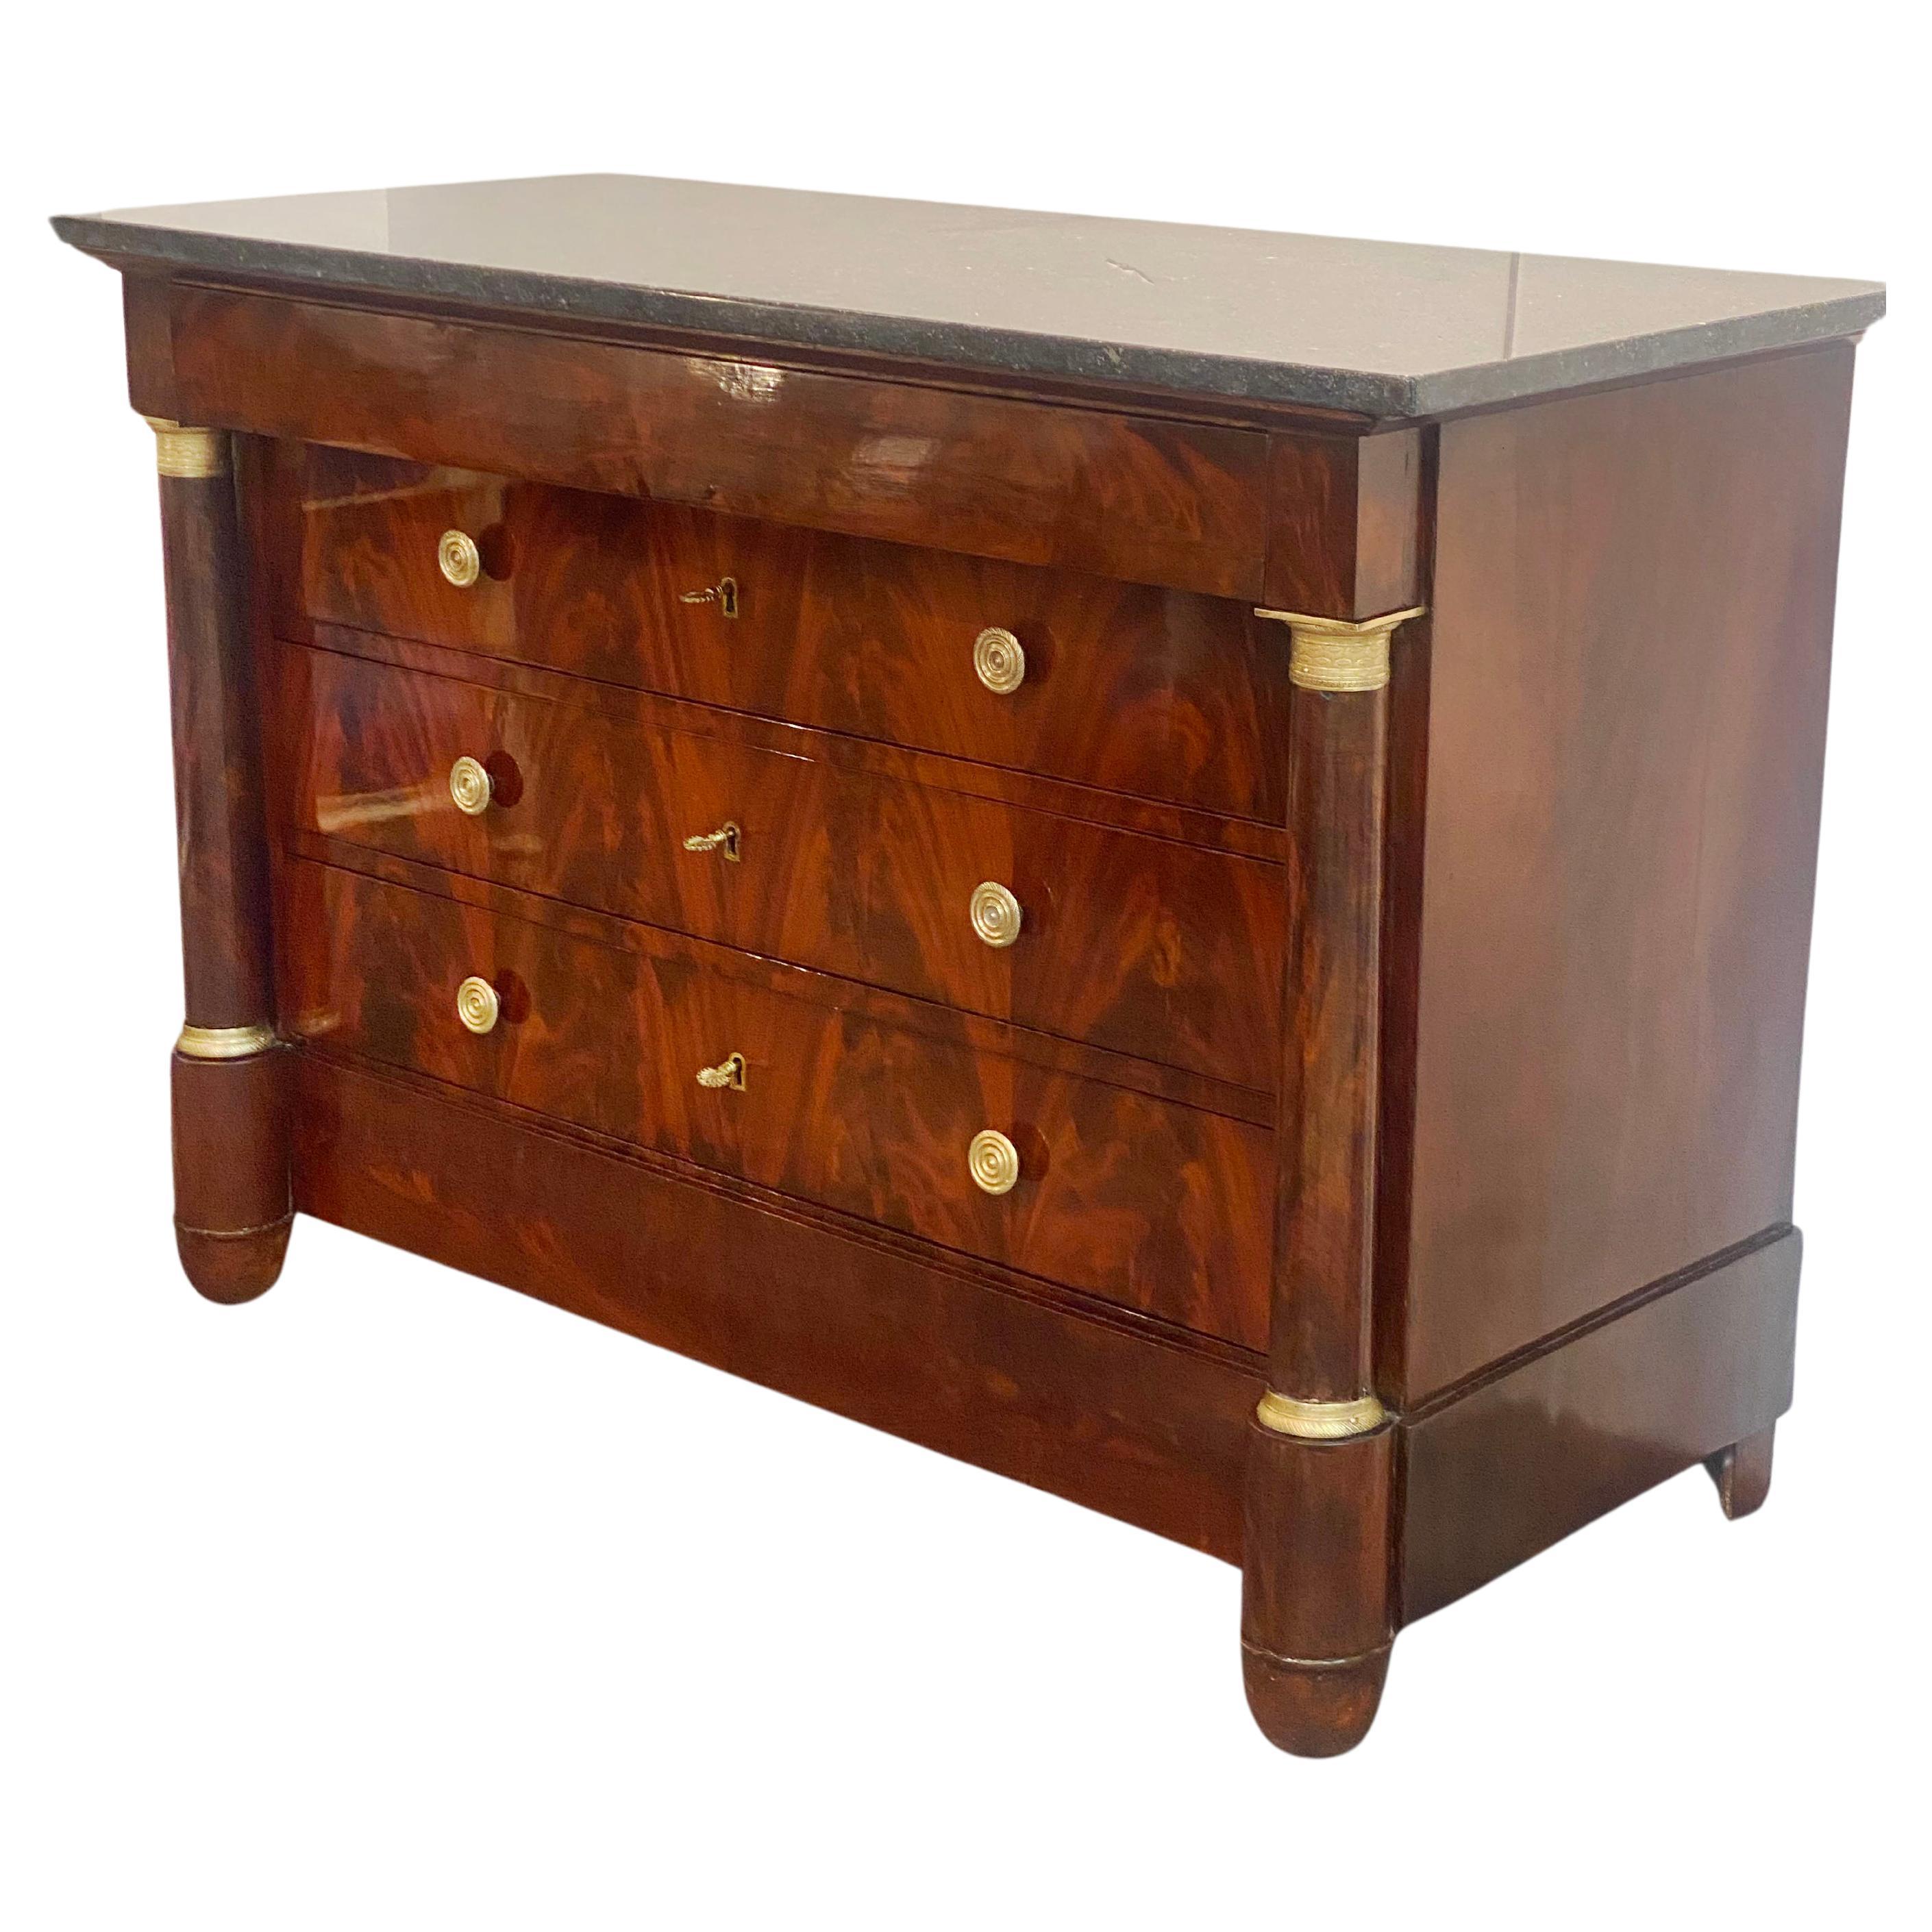 Chest of drawers - Empire period - Mahogany  